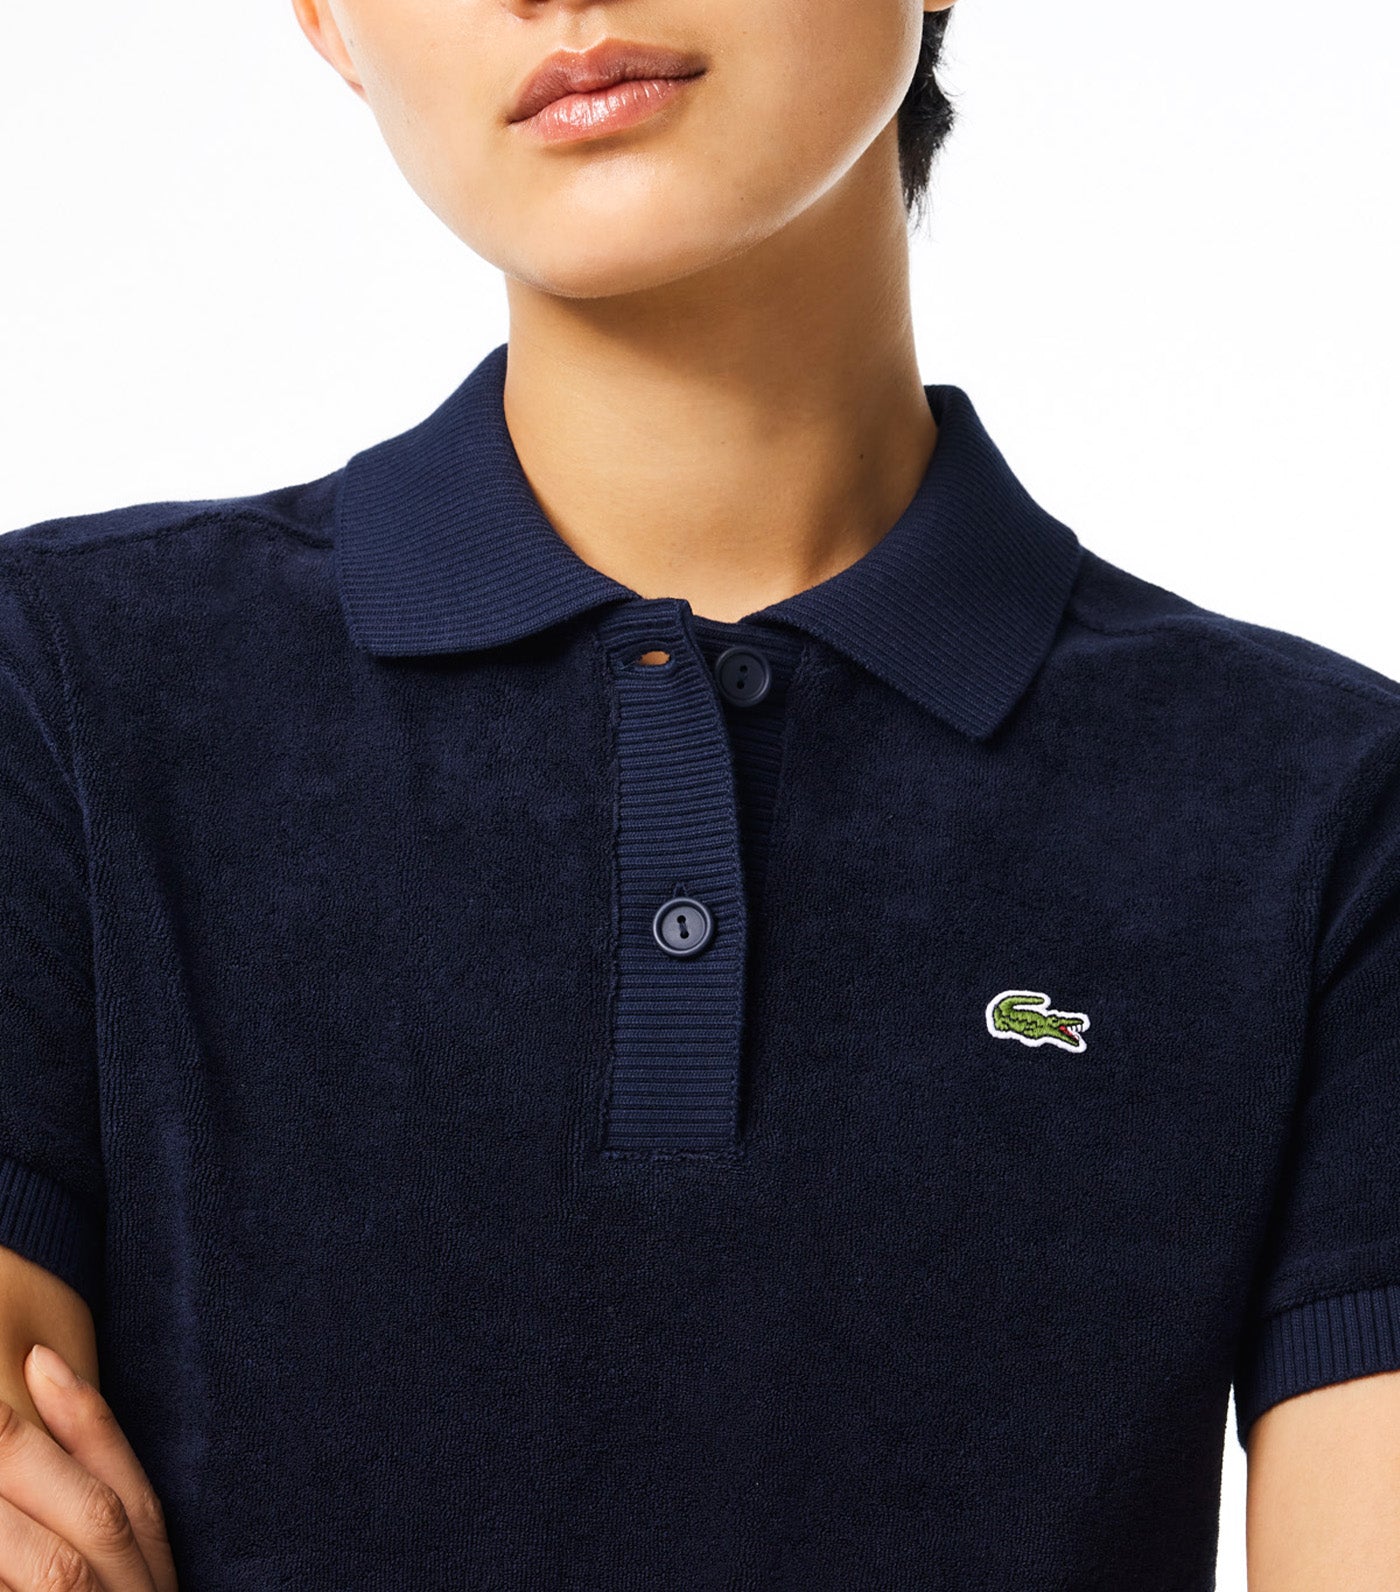 Slim Fit Terry Knit Polo Shirt Navy Blue